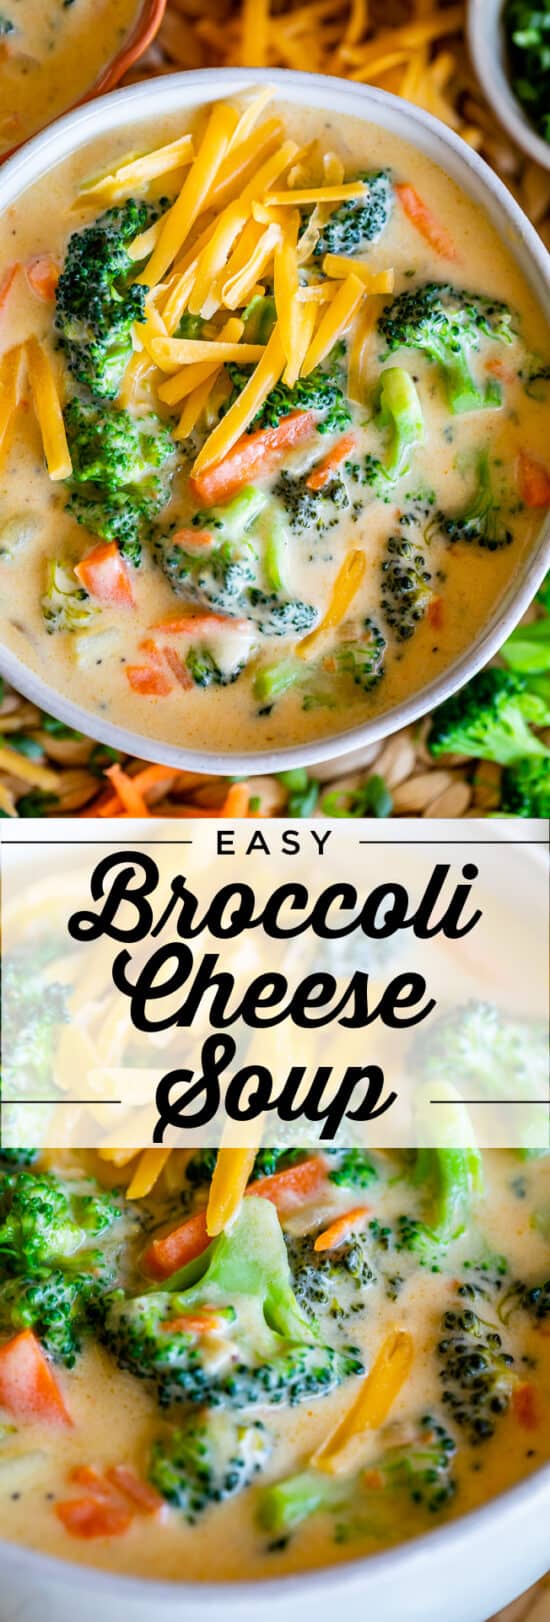 broccoli and cheese soup in a white bowl with cheddar cheese garnish